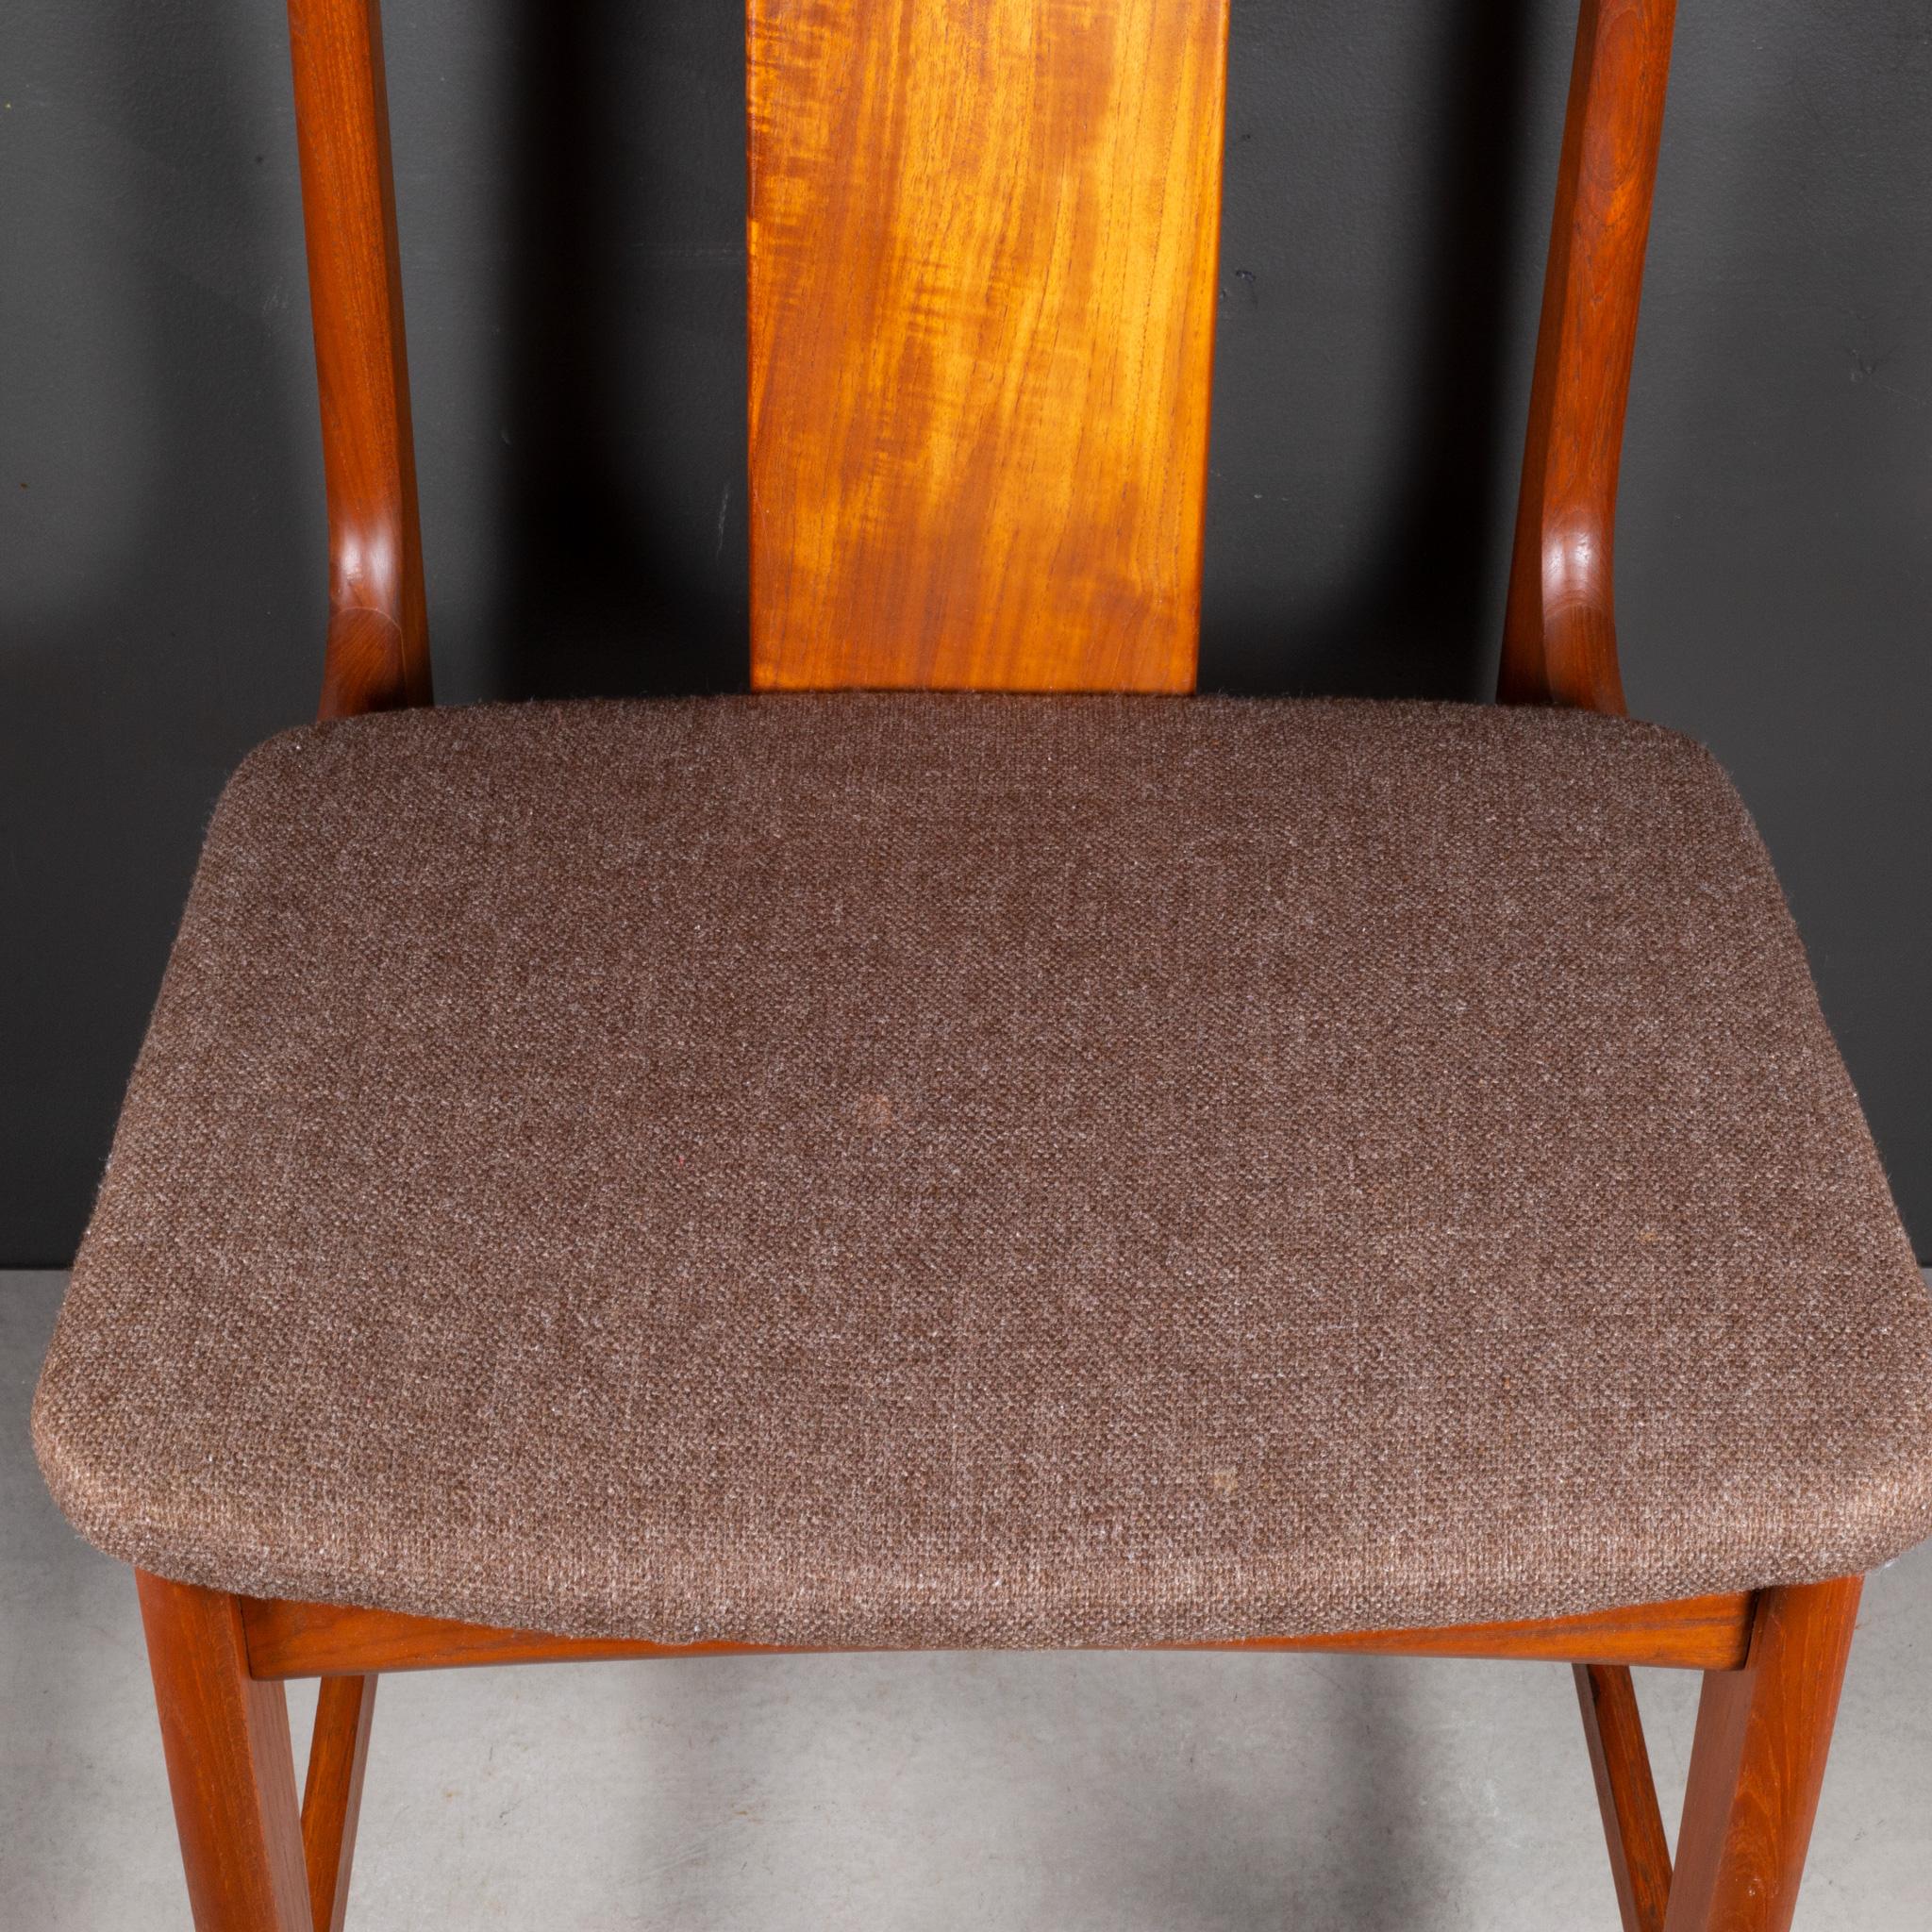 Midcentury Japanese Sculpted Teak Dining Chairs C.1960 For Sale 8